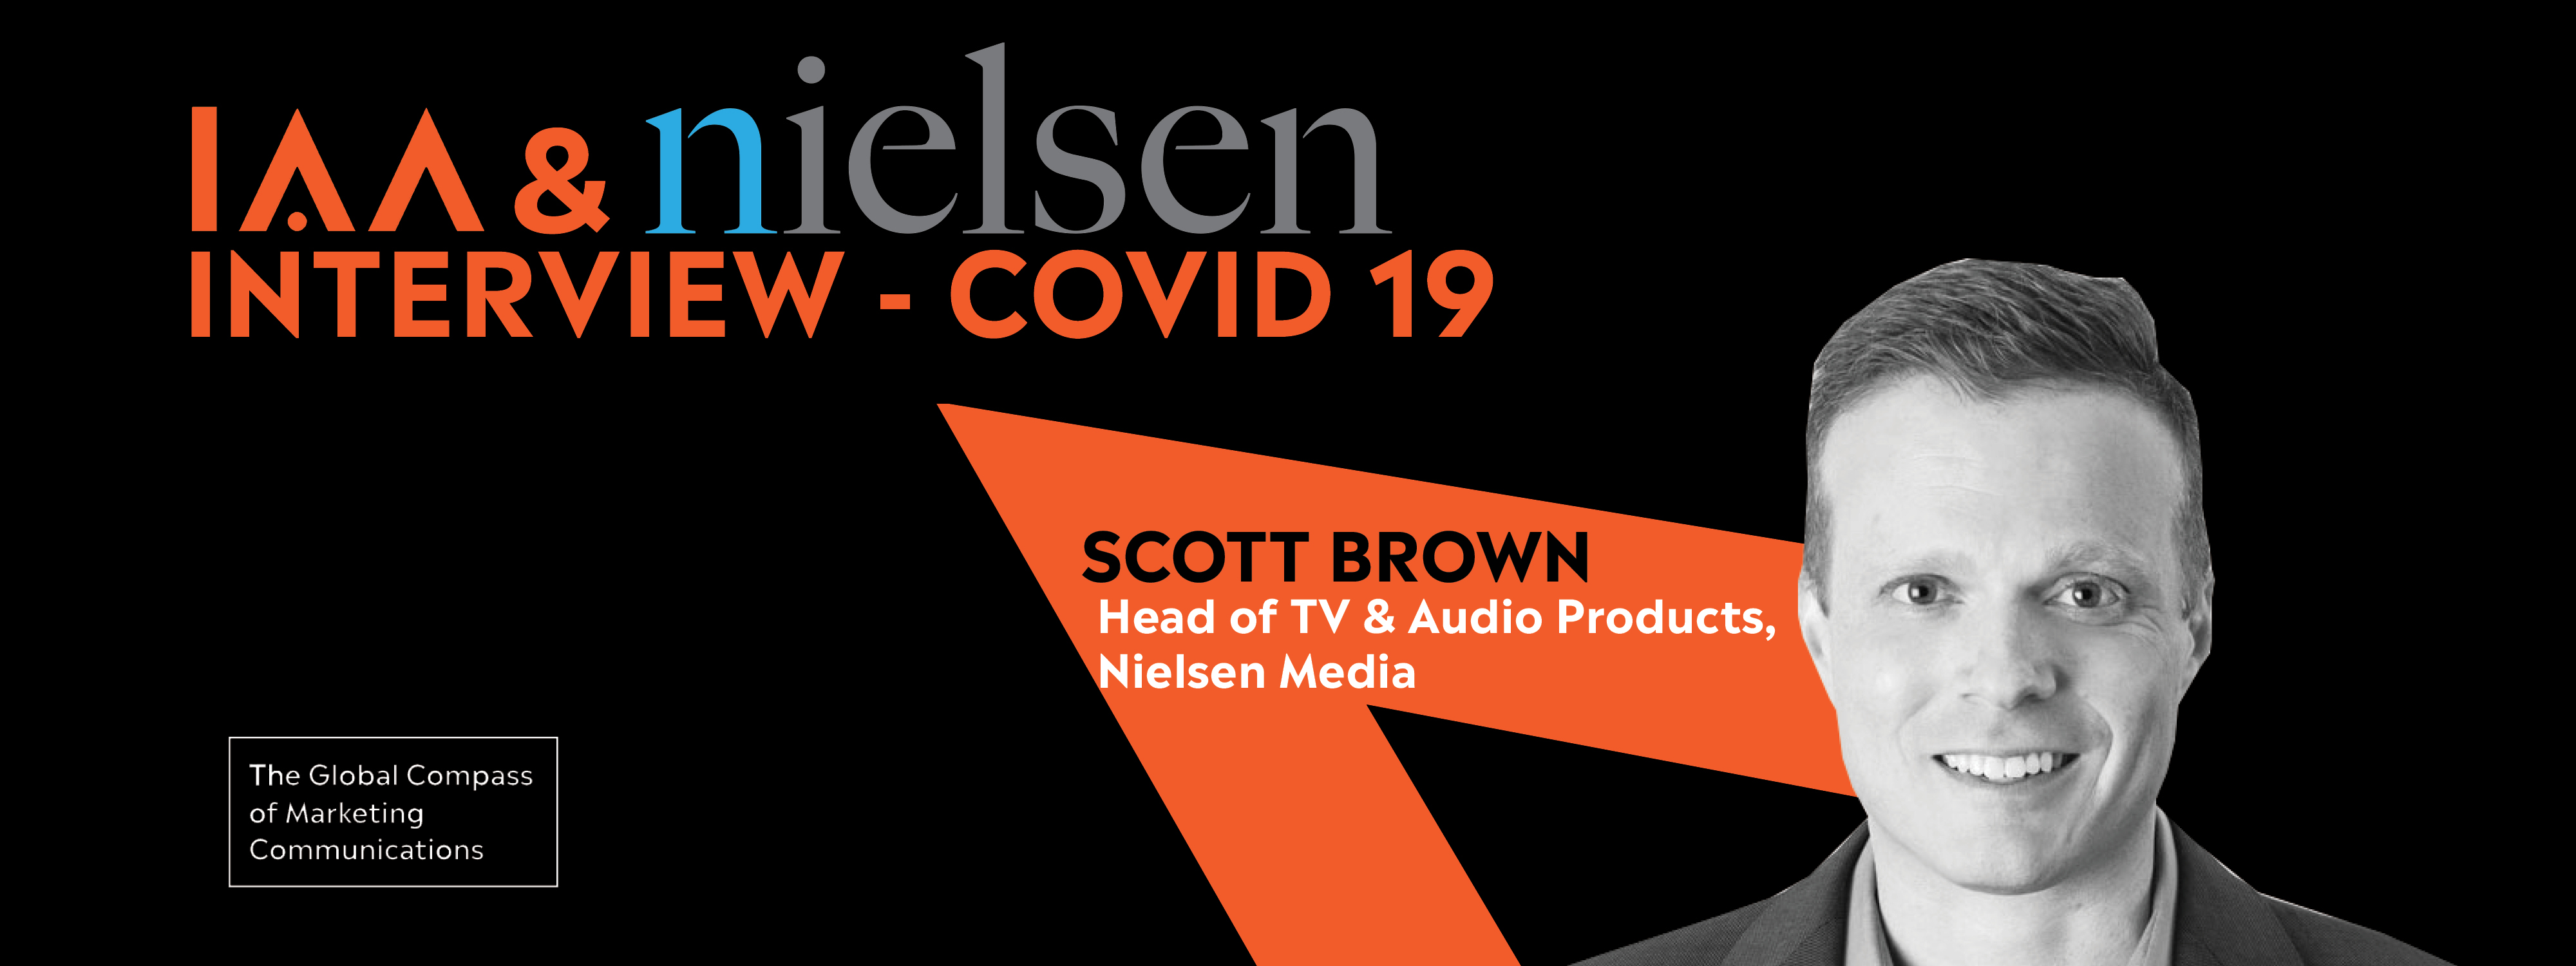 An interview between IAA and Nielsen's GM on media consumption during Covid-19.